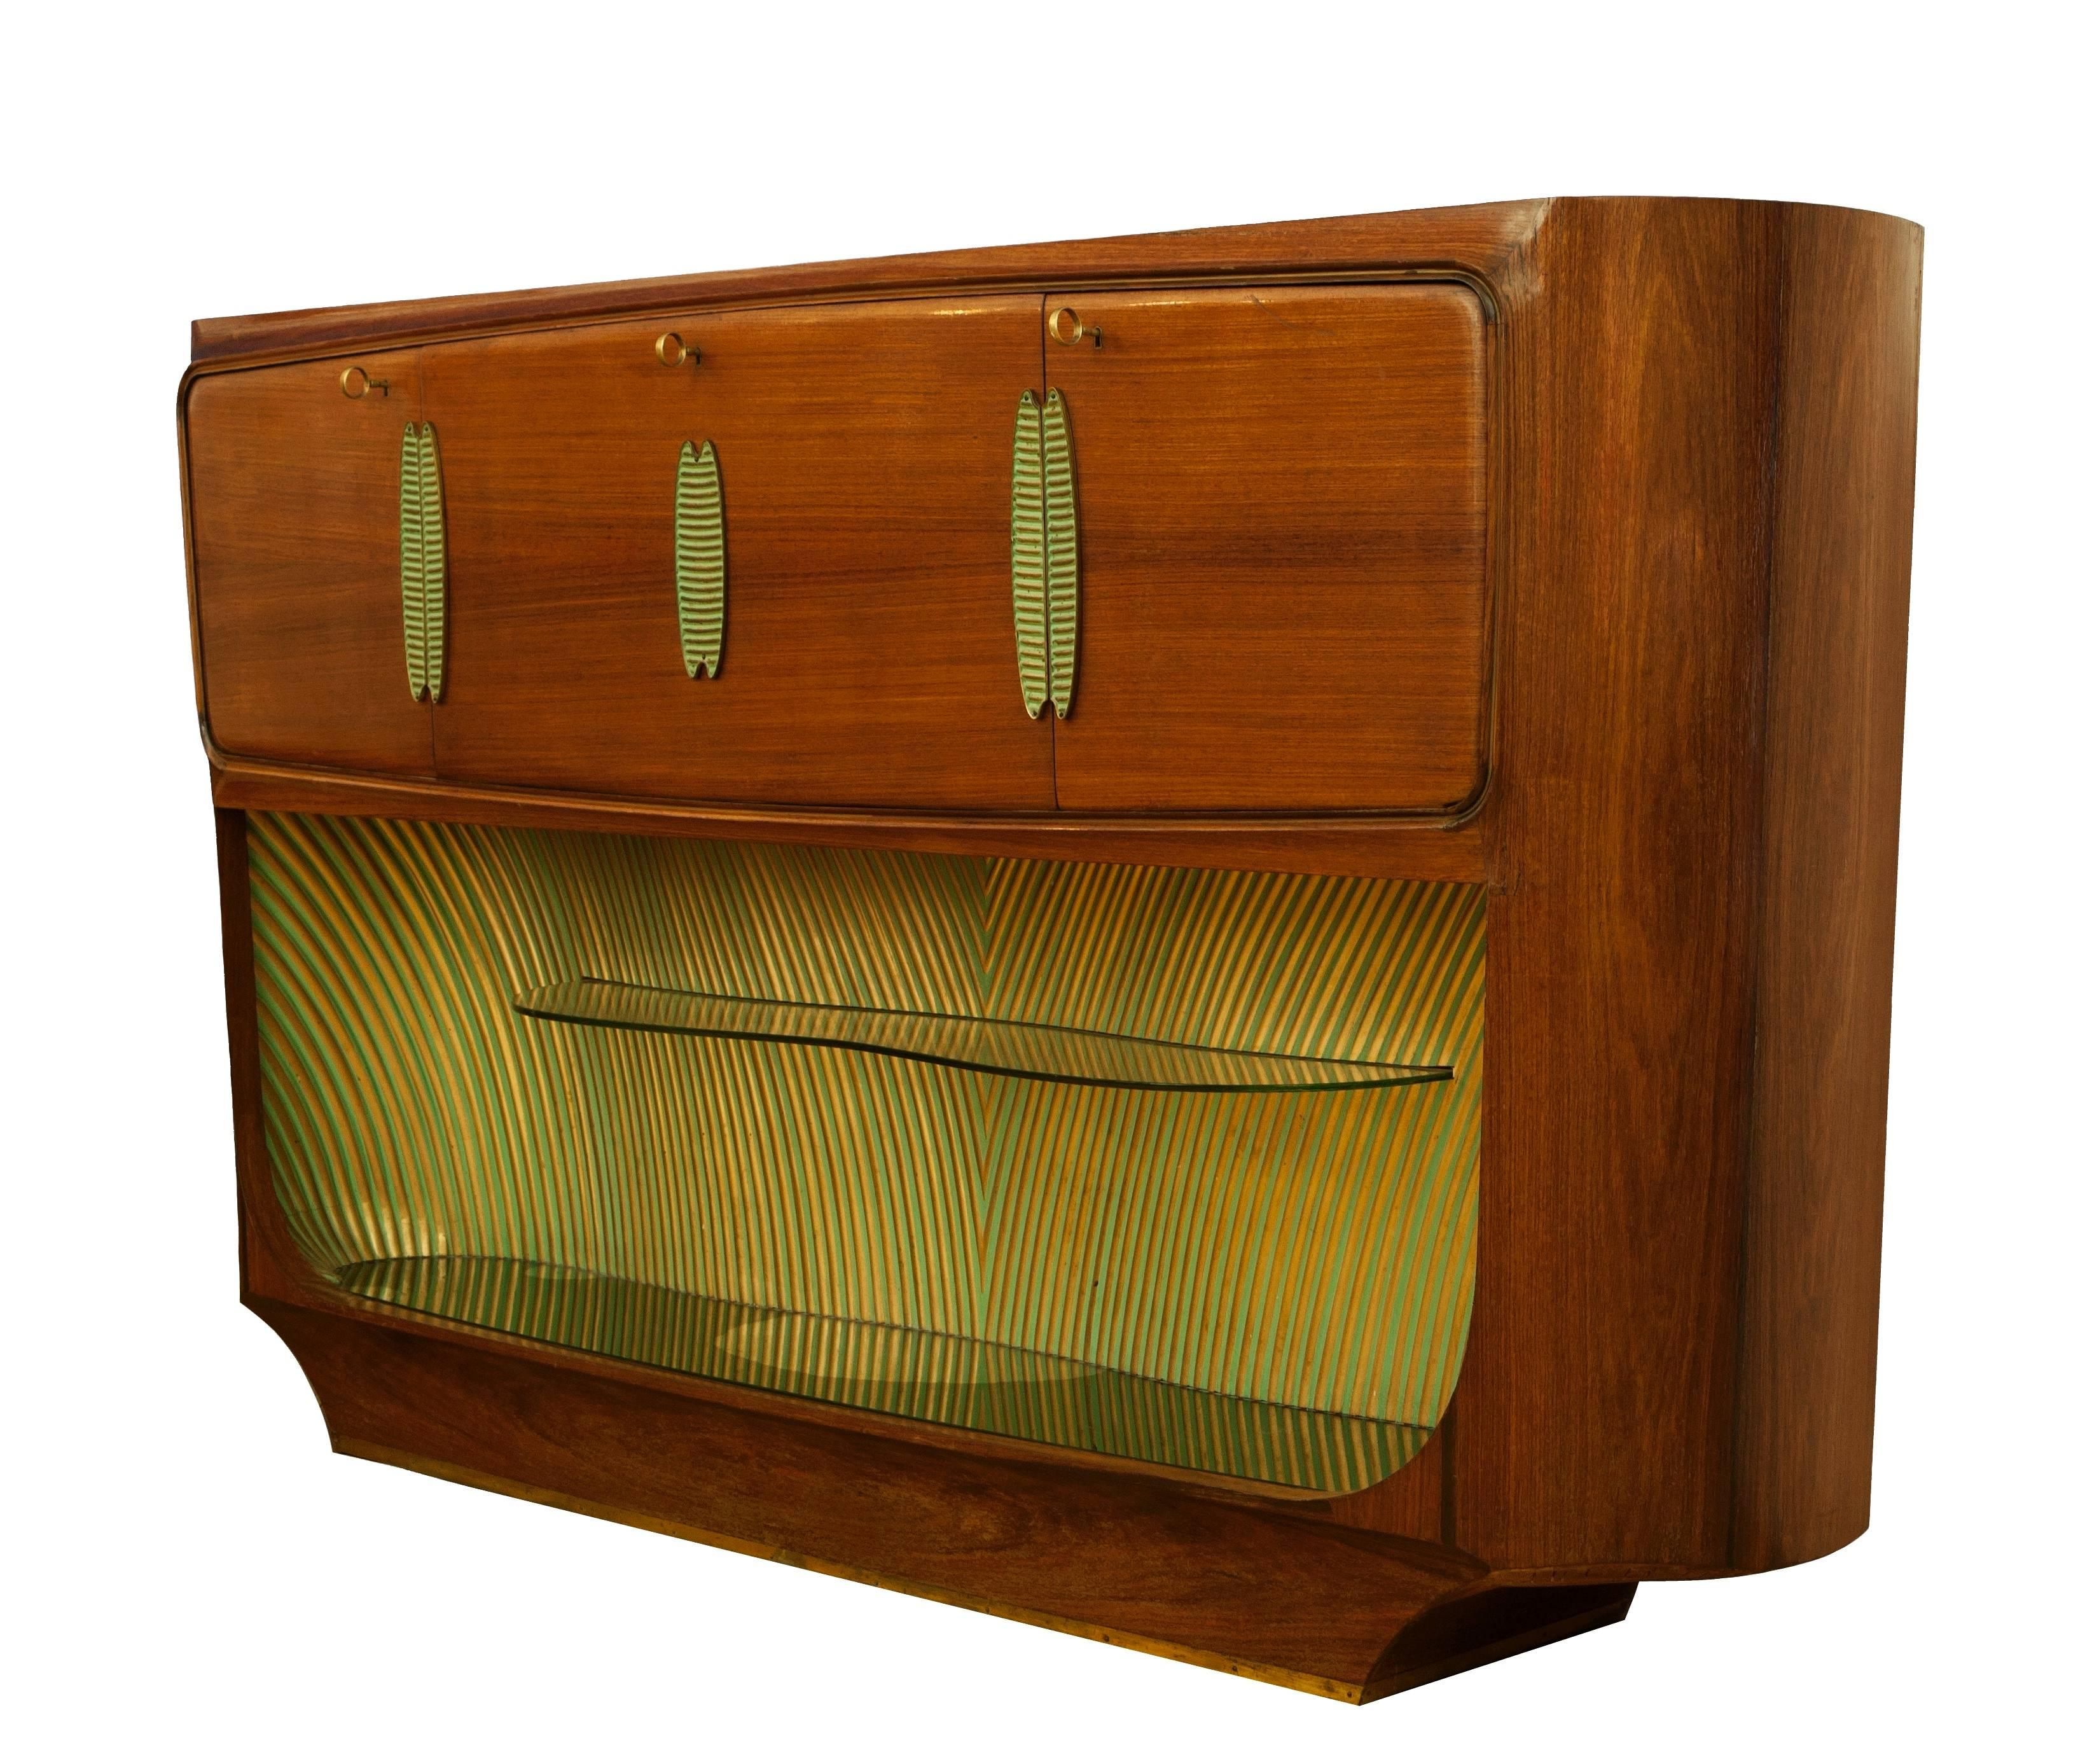 Elegant Art Deco buffet, bar cabinet designed by Vittorio Dassi and manufactured by Consorzio Esposizione Mobili Cantú, Italy 1940s with maker's label and stamp. Vittorio Dassi was a furniture designer working in Milan in the mid-20th century.